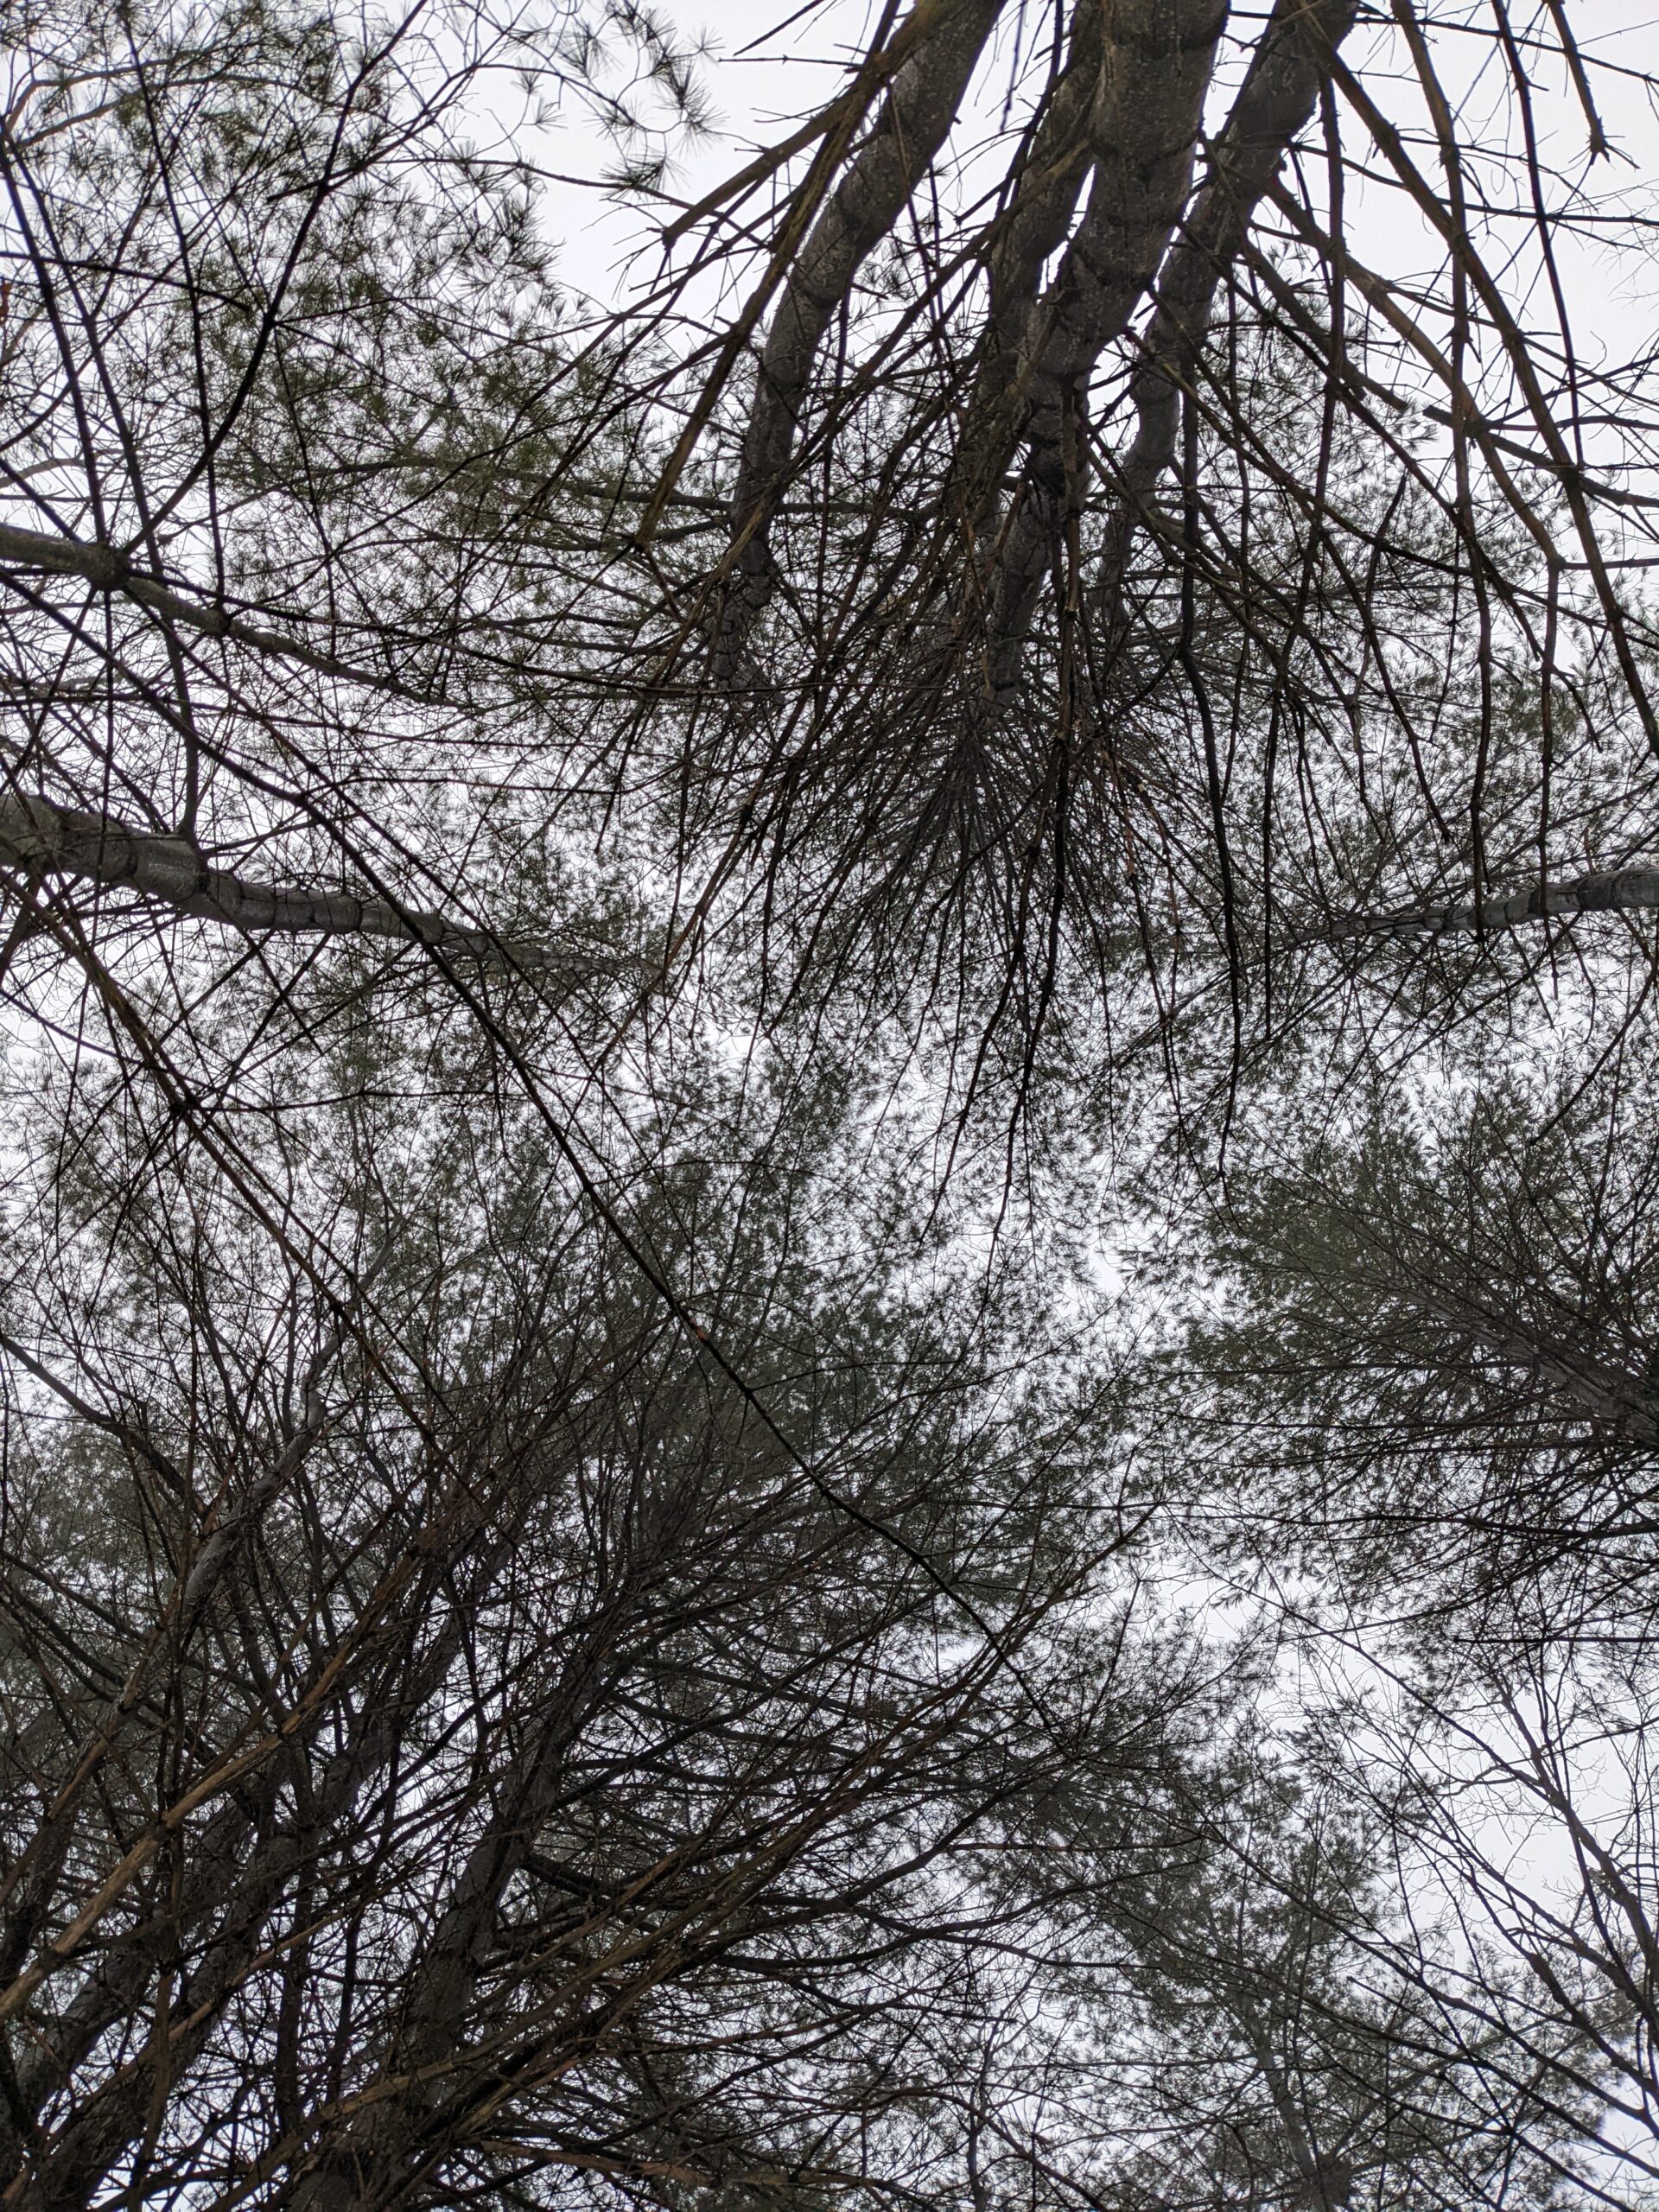 view of trees and a cloudy sky looking directly upward from below